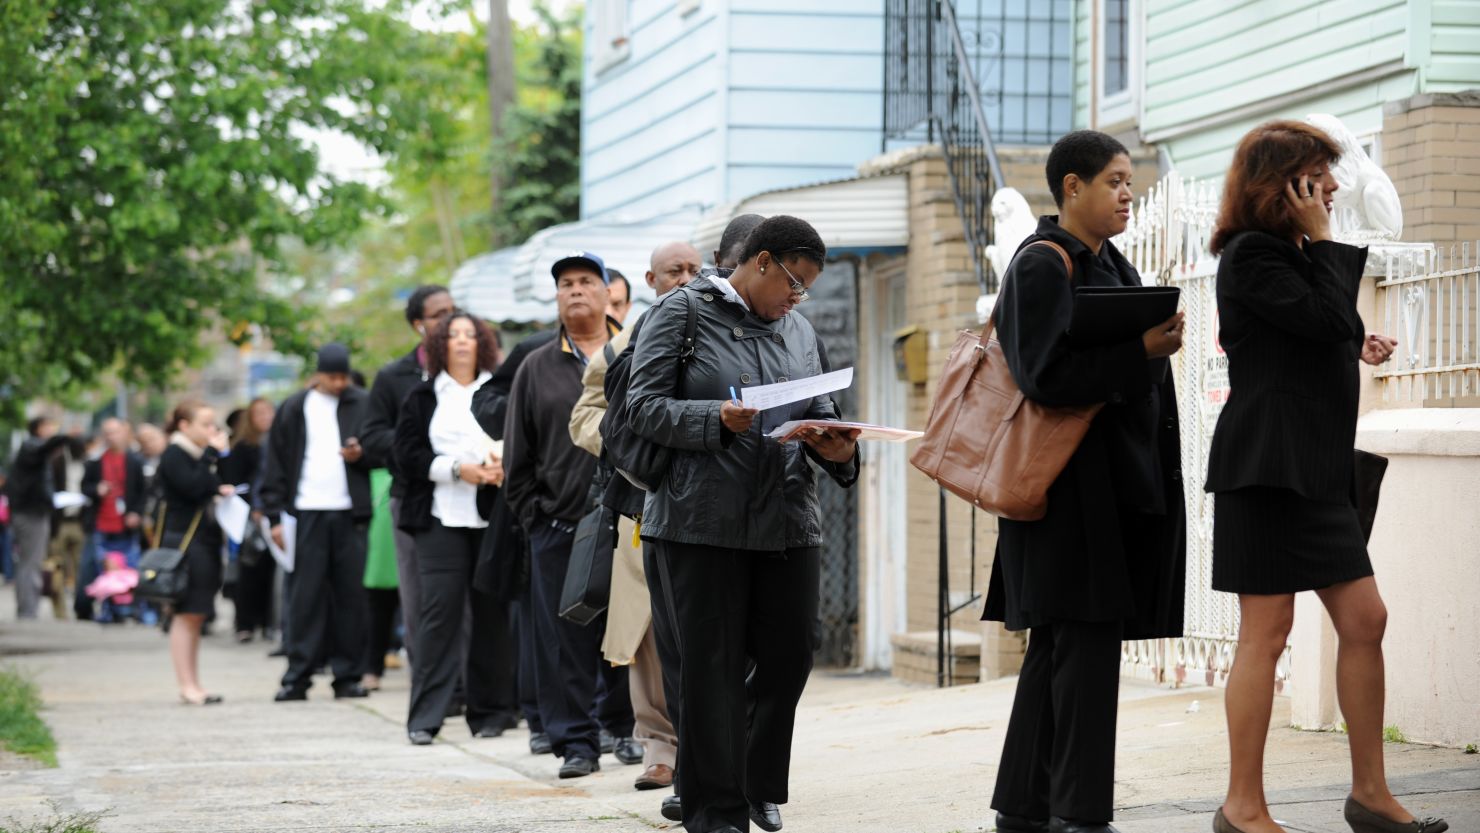 People seeking jobs wait in line at an employment fair in New York in May 2012.